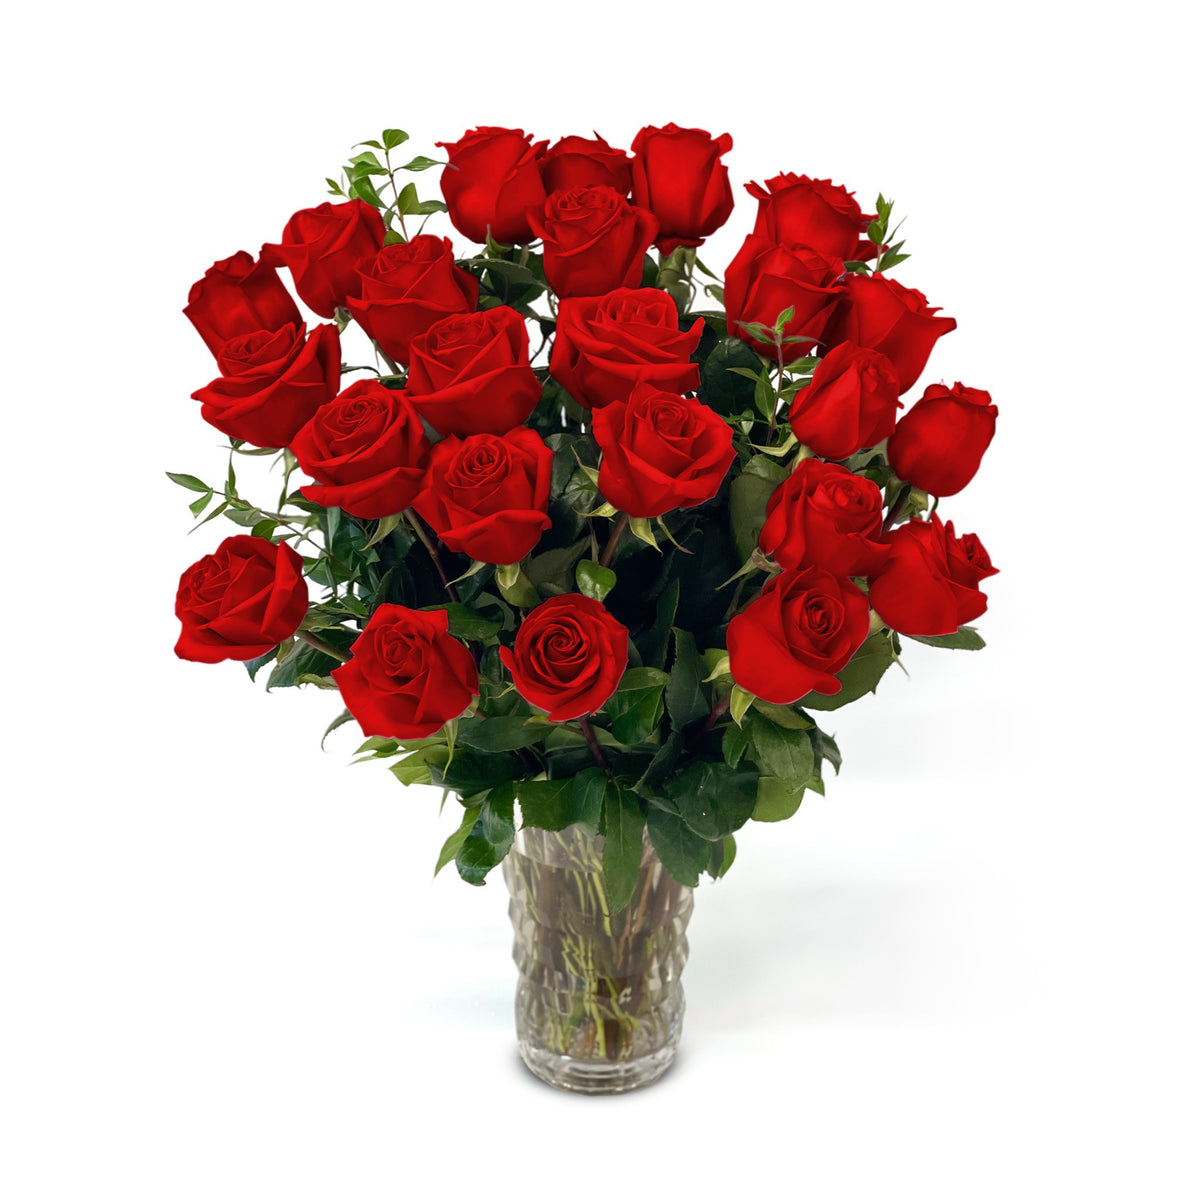 Queens Flower Delivery - Fresh Roses in a Crystal Vase | Red - 2 Dozen